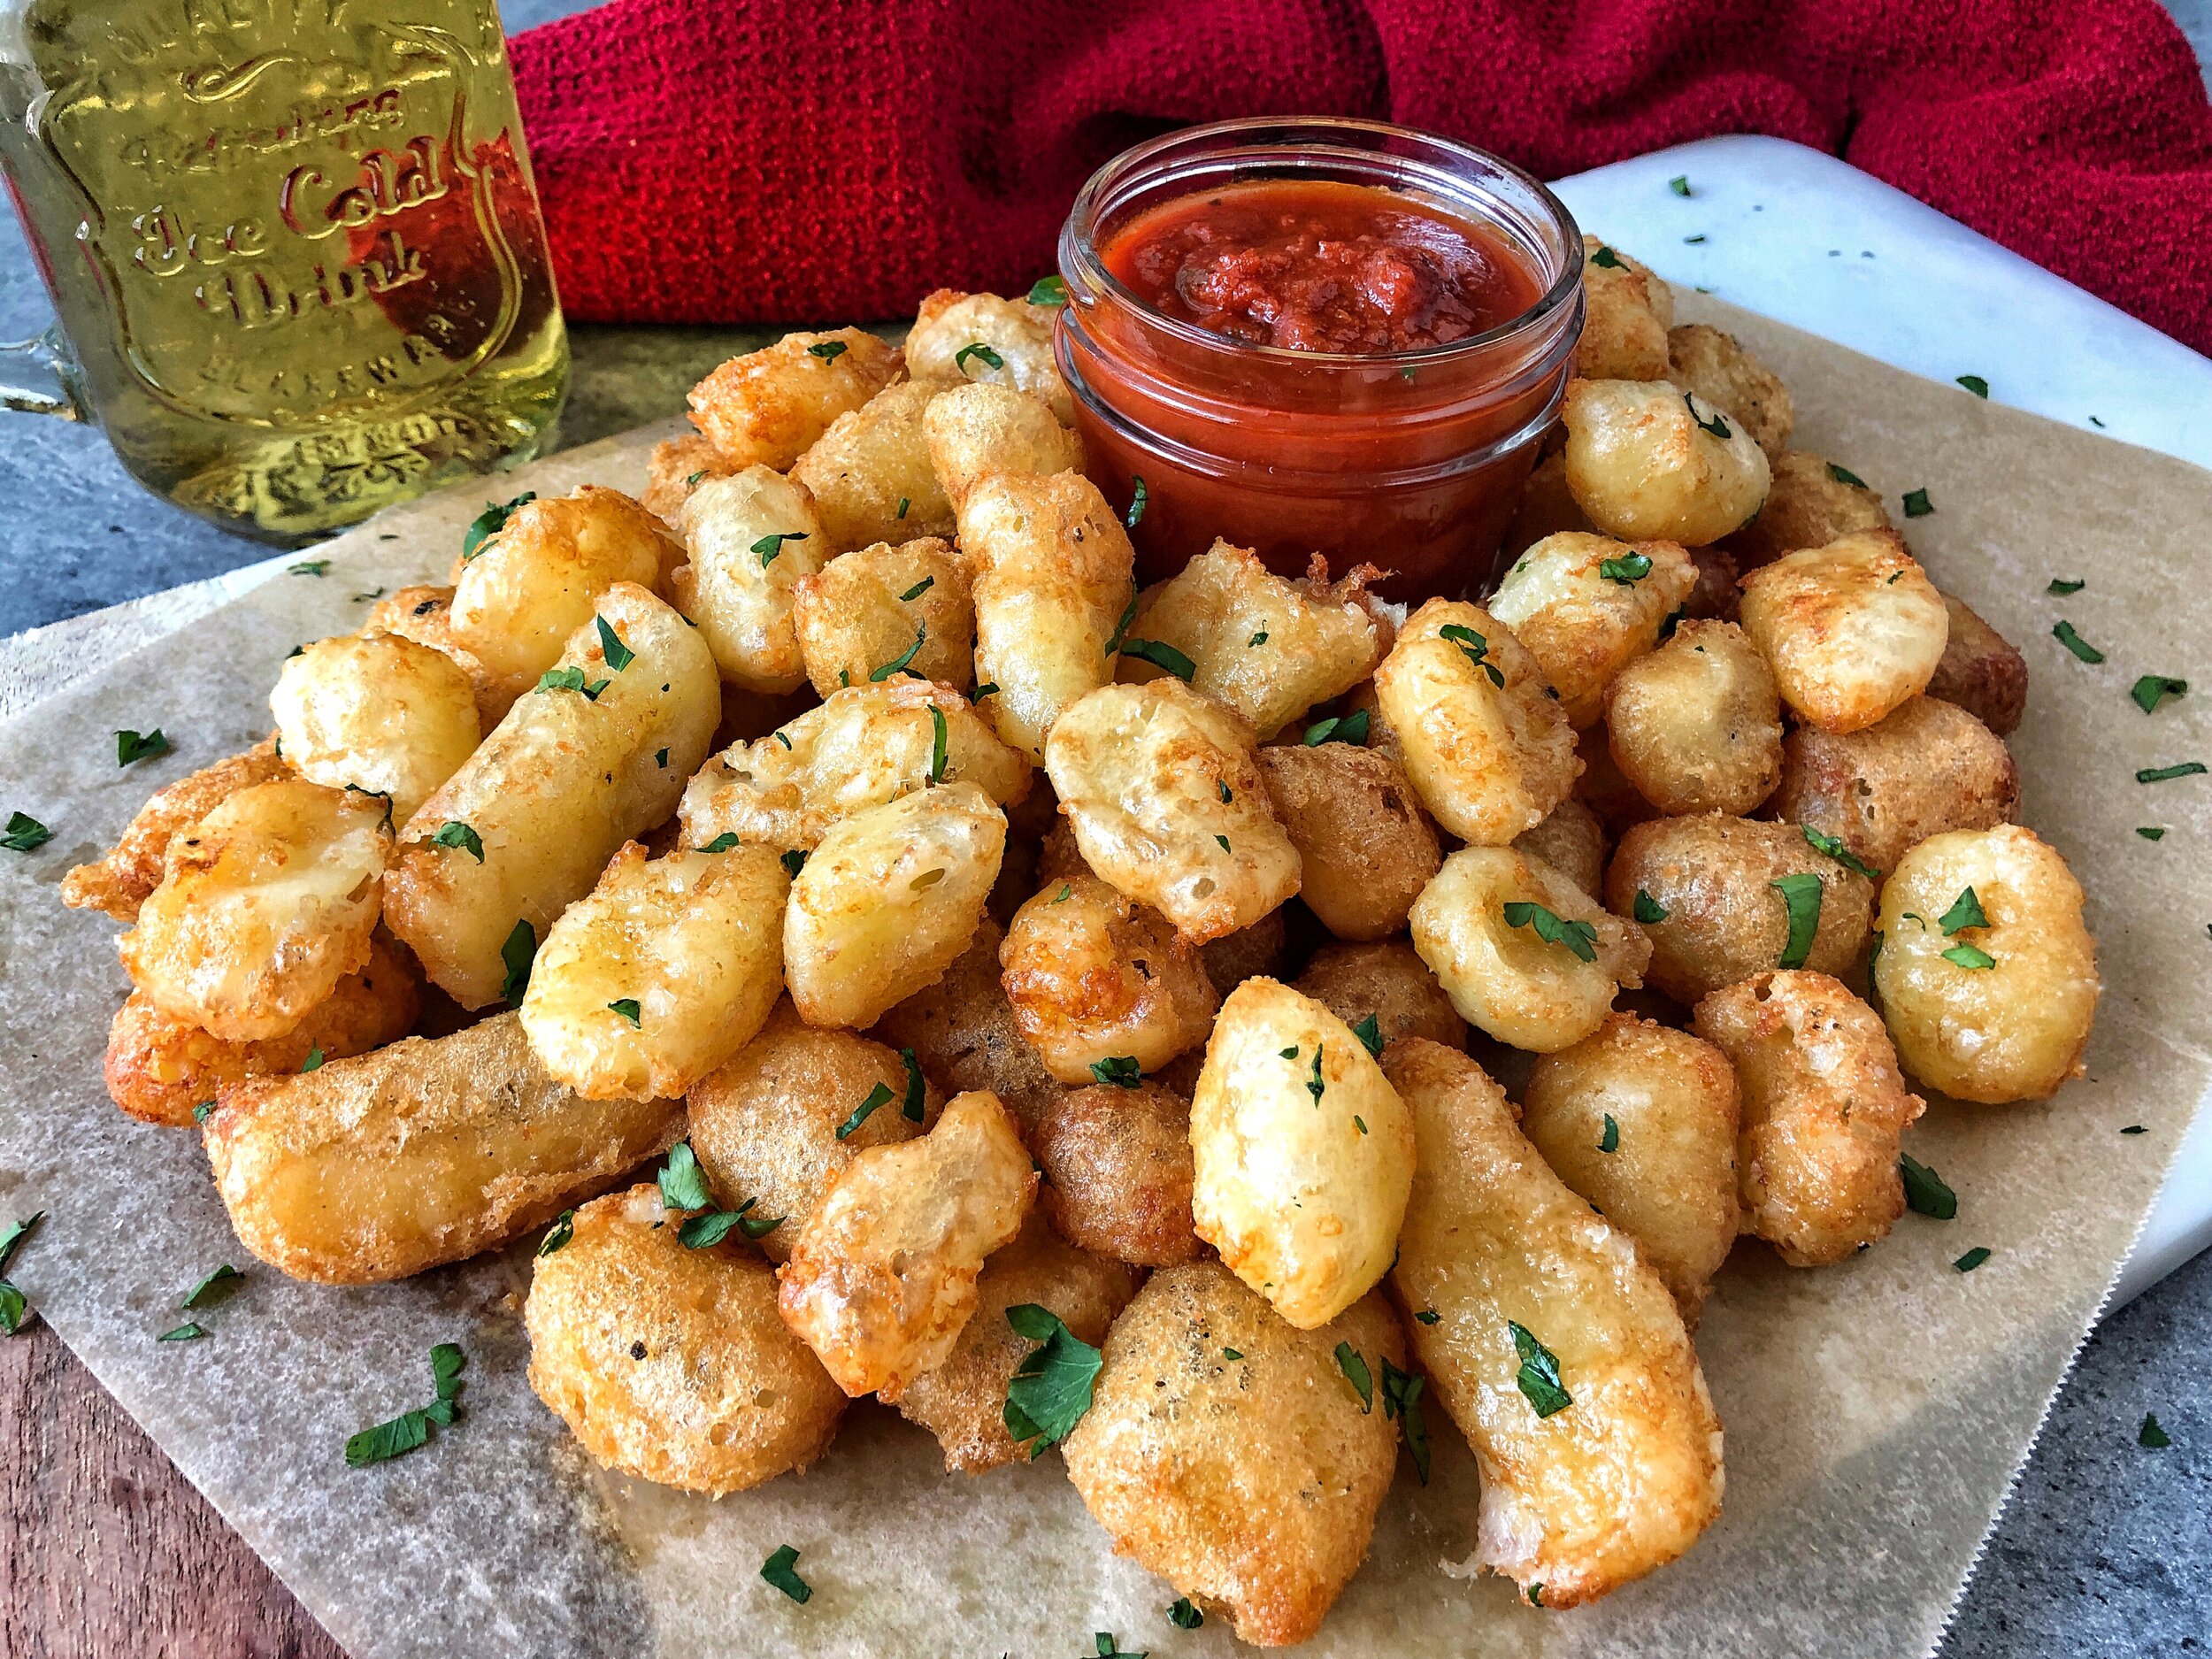 What Are Cheese Curds and How to Enjoy Them